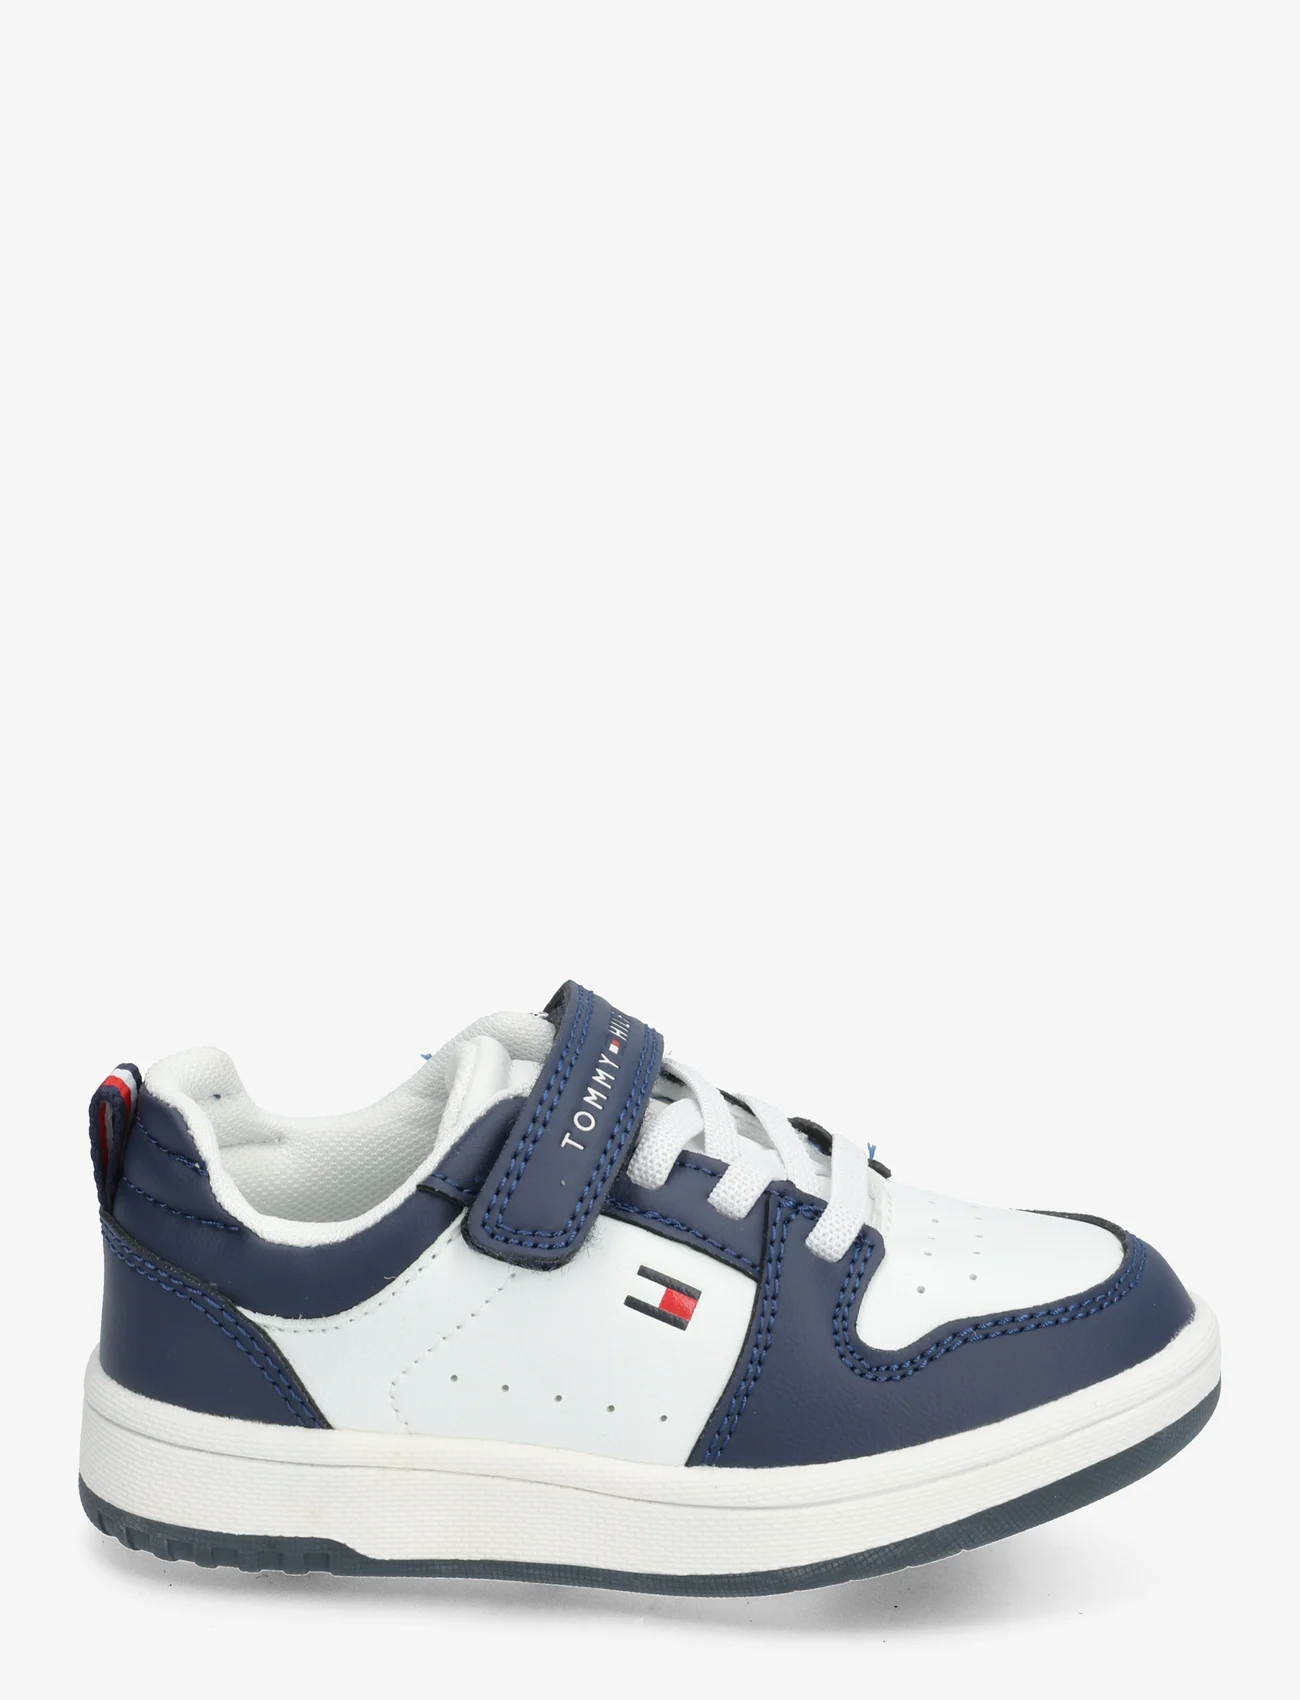 Tommy Hilfiger - LOW CUT LACE-UP/VELCRO SNEAKER - summer savings - blue/white - 1